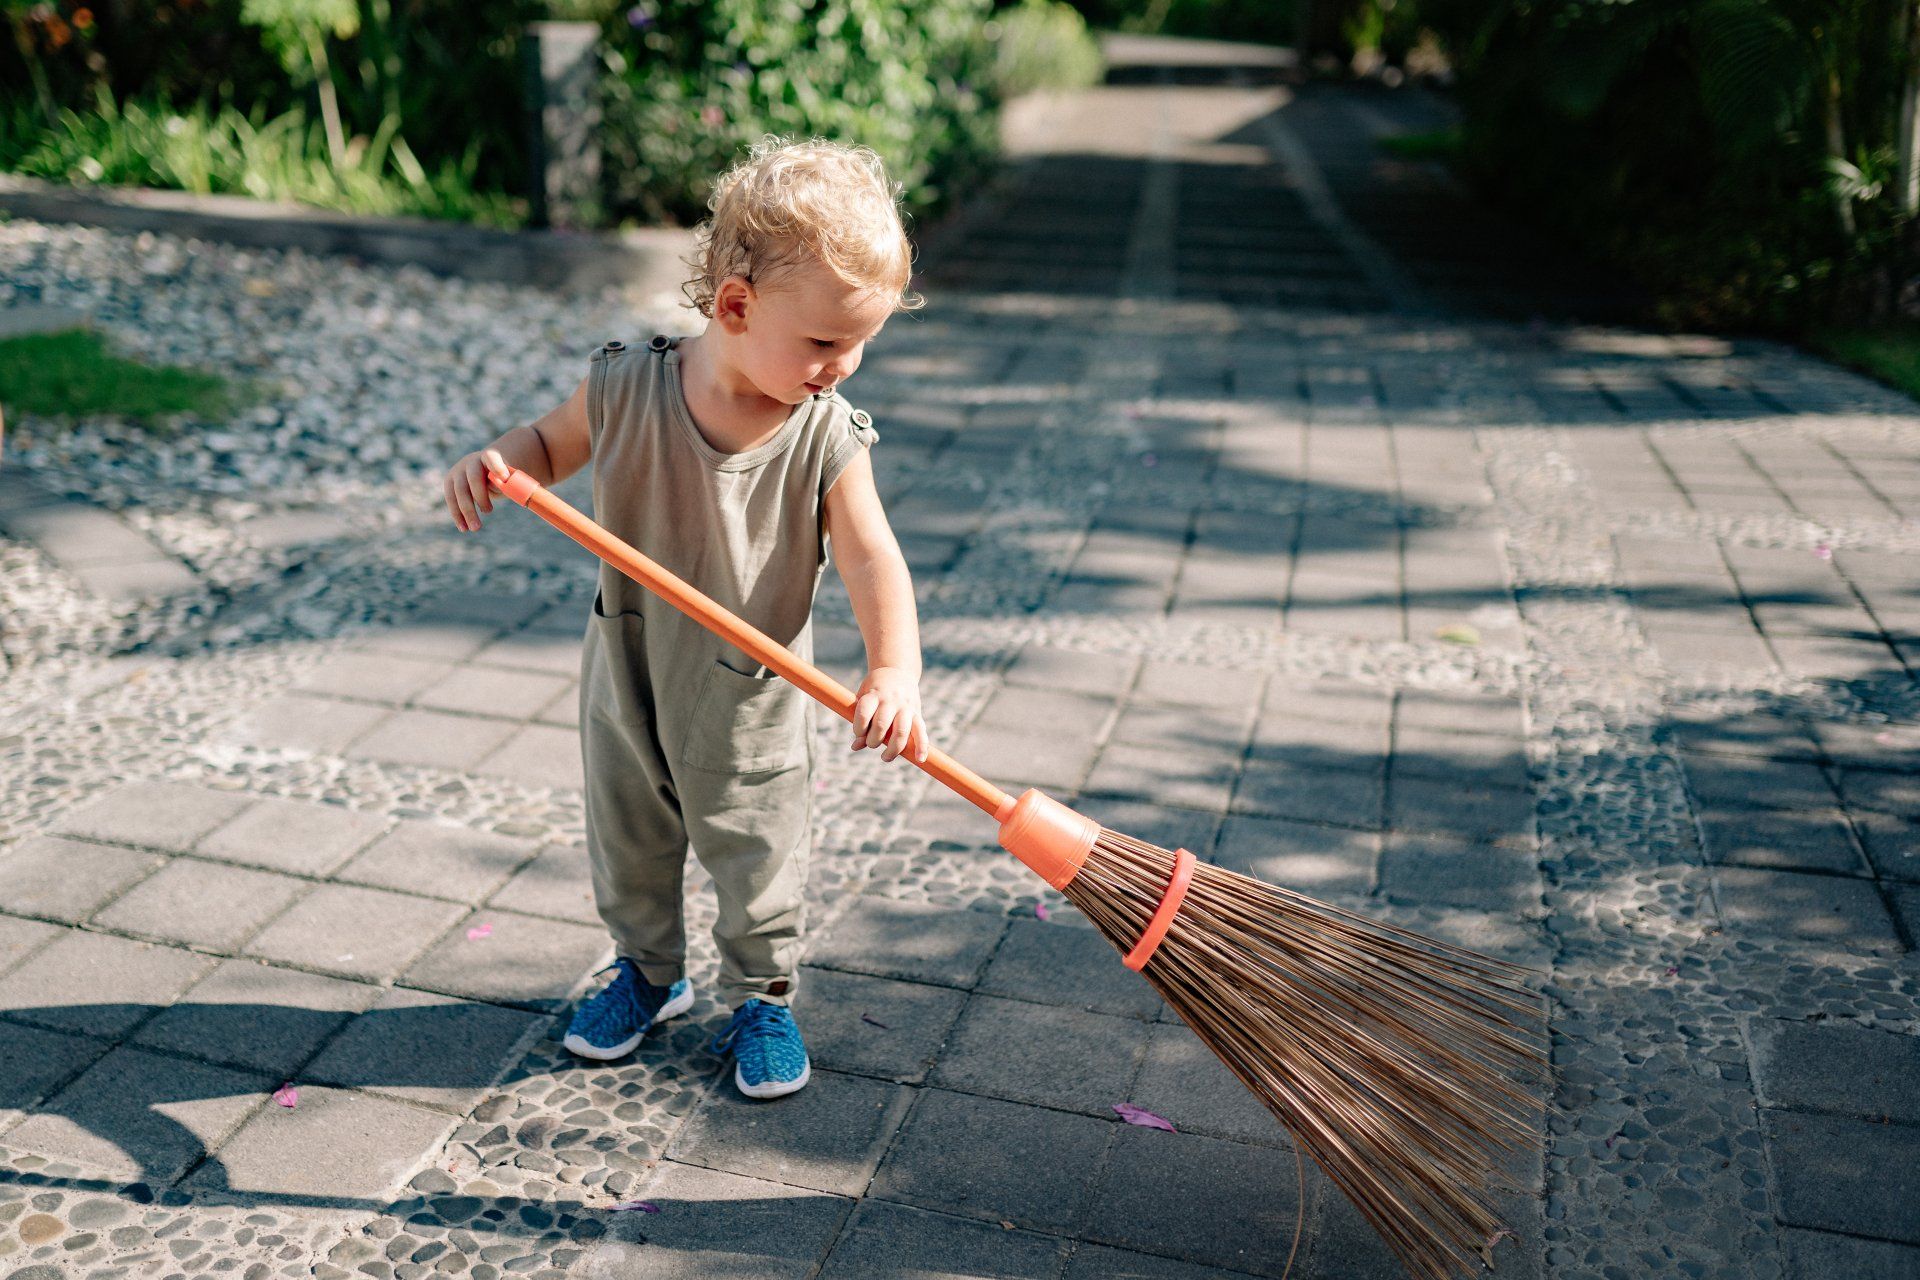 Toddler sweeping with a broom